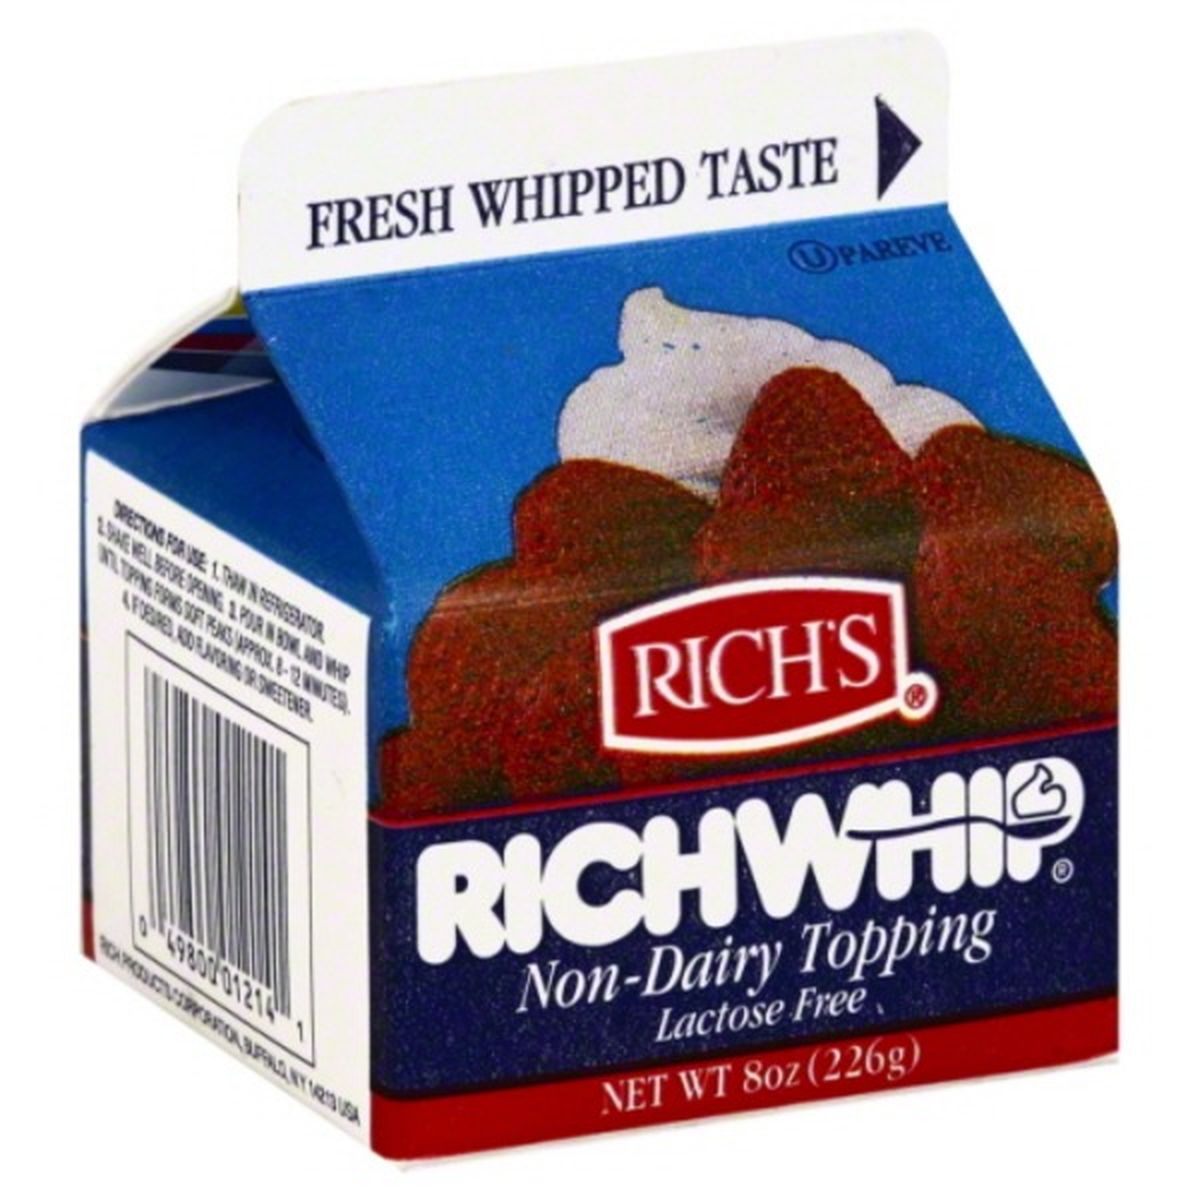 Calories in Rich's Non-Dairy Topping, RichWhip